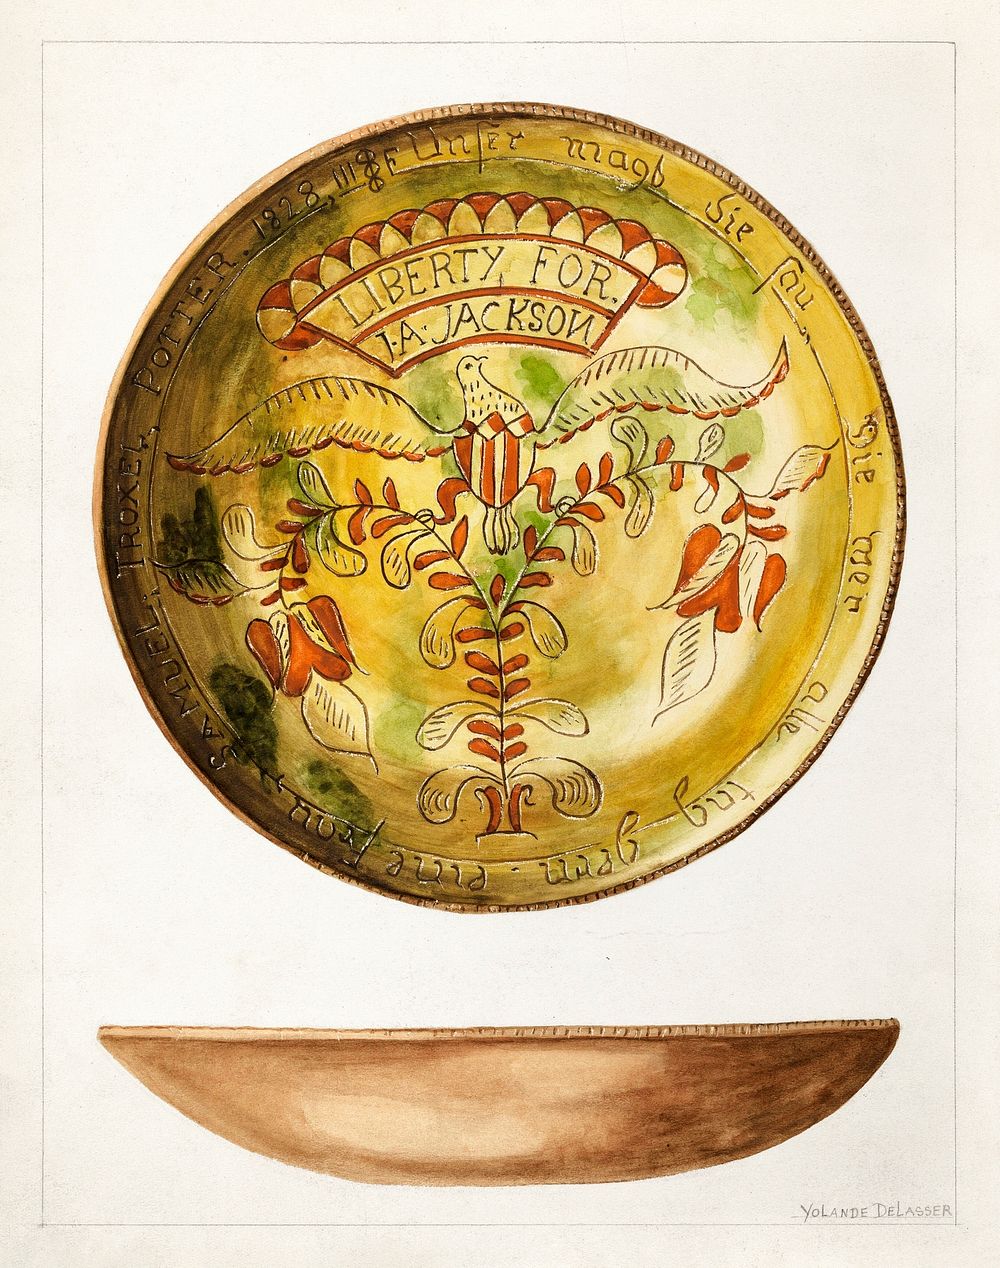 Pa. German Plate (ca.1937) by Yolande Delasser. Original from The National Gallery of Art. Digitally enhanced by rawpixel.